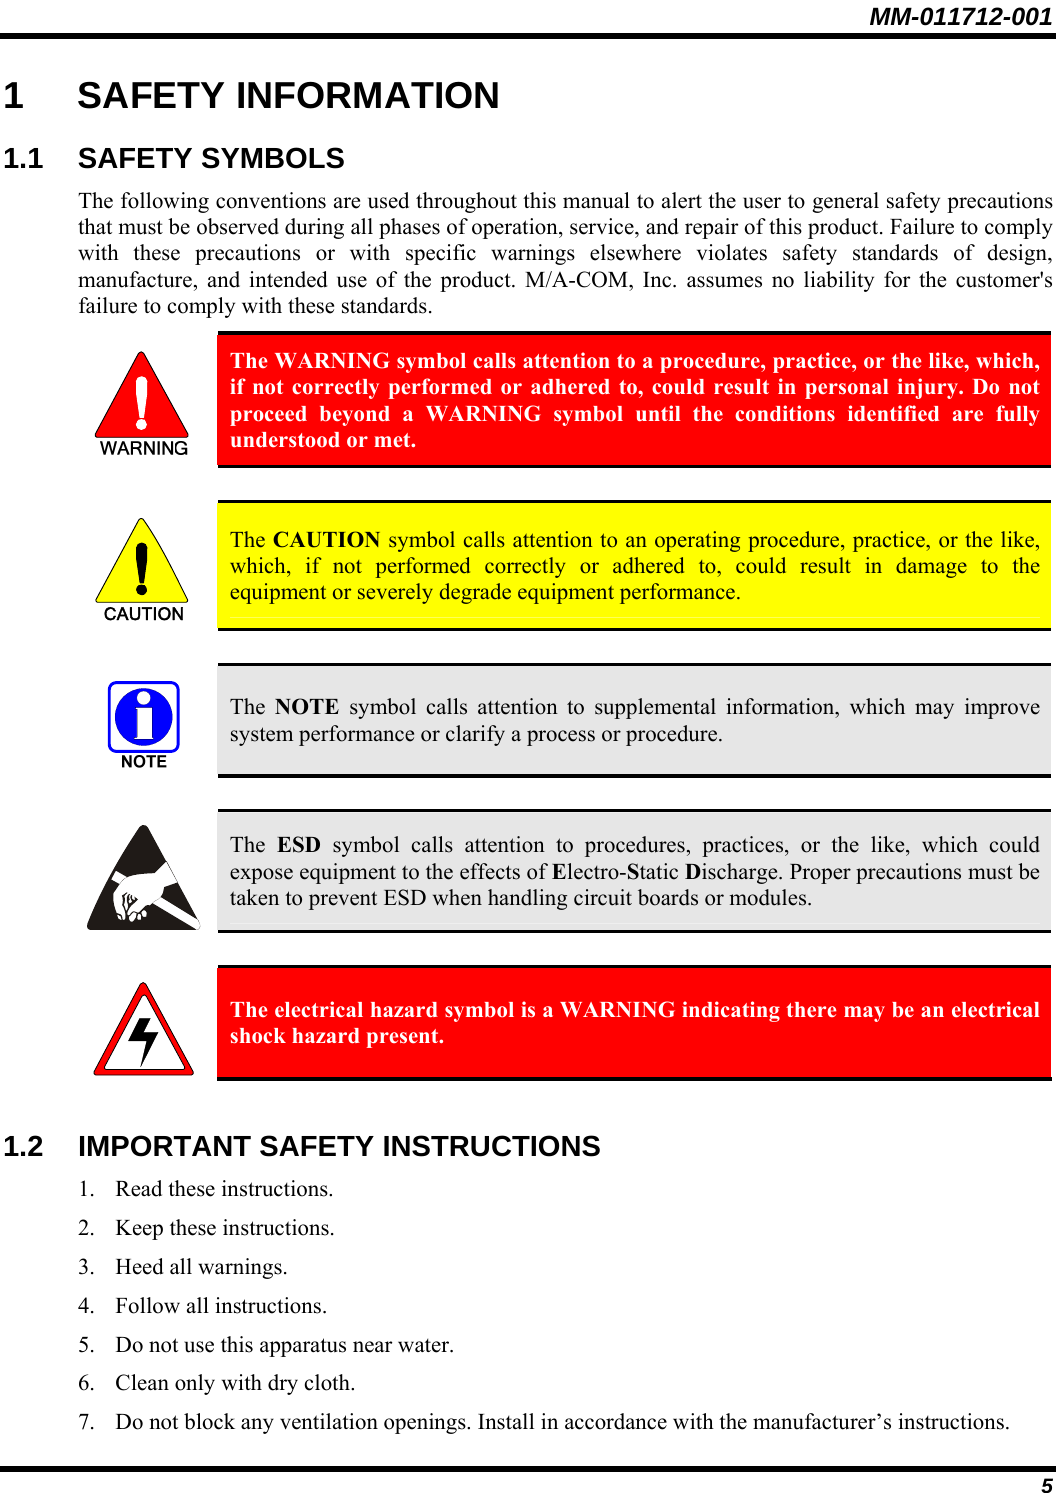 MM-011712-001 5 1 SAFETY INFORMATION 1.1 SAFETY SYMBOLS The following conventions are used throughout this manual to alert the user to general safety precautions that must be observed during all phases of operation, service, and repair of this product. Failure to comply with these precautions or with specific warnings elsewhere violates safety standards of design, manufacture, and intended use of the product. M/A-COM, Inc. assumes no liability for the customer&apos;s failure to comply with these standards.  The WARNING symbol calls attention to a procedure, practice, or the like, which, if not correctly performed or adhered to, could result in personal injury. Do not proceed beyond a WARNING symbol until the conditions identified are fully understood or met.   CAUTION  The CAUTION symbol calls attention to an operating procedure, practice, or the like, which, if not performed correctly or adhered to, could result in damage to the equipment or severely degrade equipment performance.    The  NOTE symbol calls attention to supplemental information, which may improve system performance or clarify a process or procedure.    The  ESD symbol calls attention to procedures, practices, or the like, which could expose equipment to the effects of Electro-Static Discharge. Proper precautions must be taken to prevent ESD when handling circuit boards or modules.    The electrical hazard symbol is a WARNING indicating there may be an electrical shock hazard present.  1.2  IMPORTANT SAFETY INSTRUCTIONS 1. Read these instructions. 2. Keep these instructions. 3. Heed all warnings. 4. Follow all instructions. 5. Do not use this apparatus near water. 6. Clean only with dry cloth. 7. Do not block any ventilation openings. Install in accordance with the manufacturer’s instructions. 